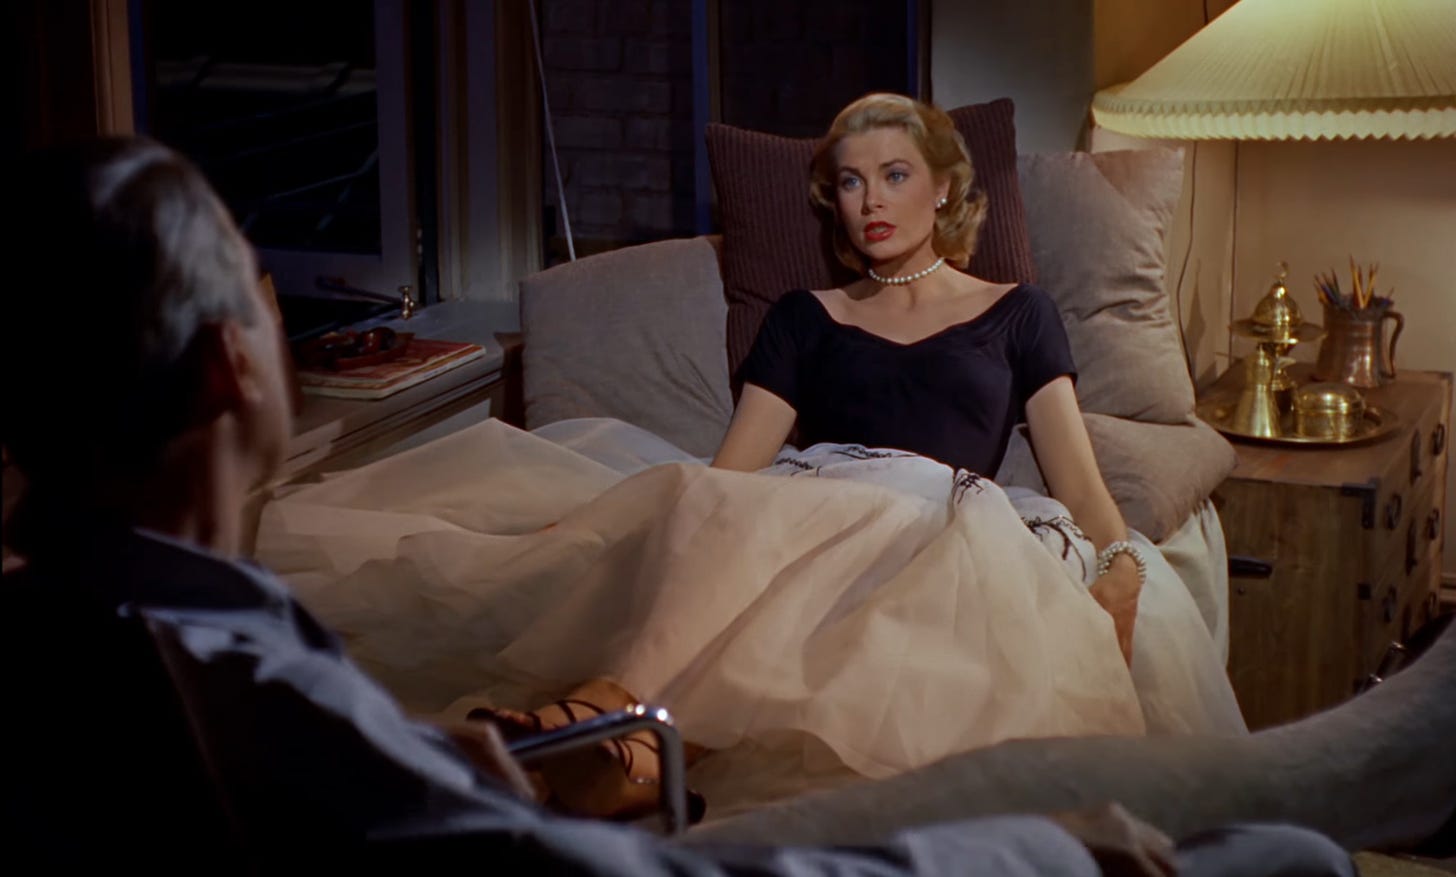 Jimmy Stewart (left) and Grace Kelly (right) sitting and conversing with one another in REAR WINDOW